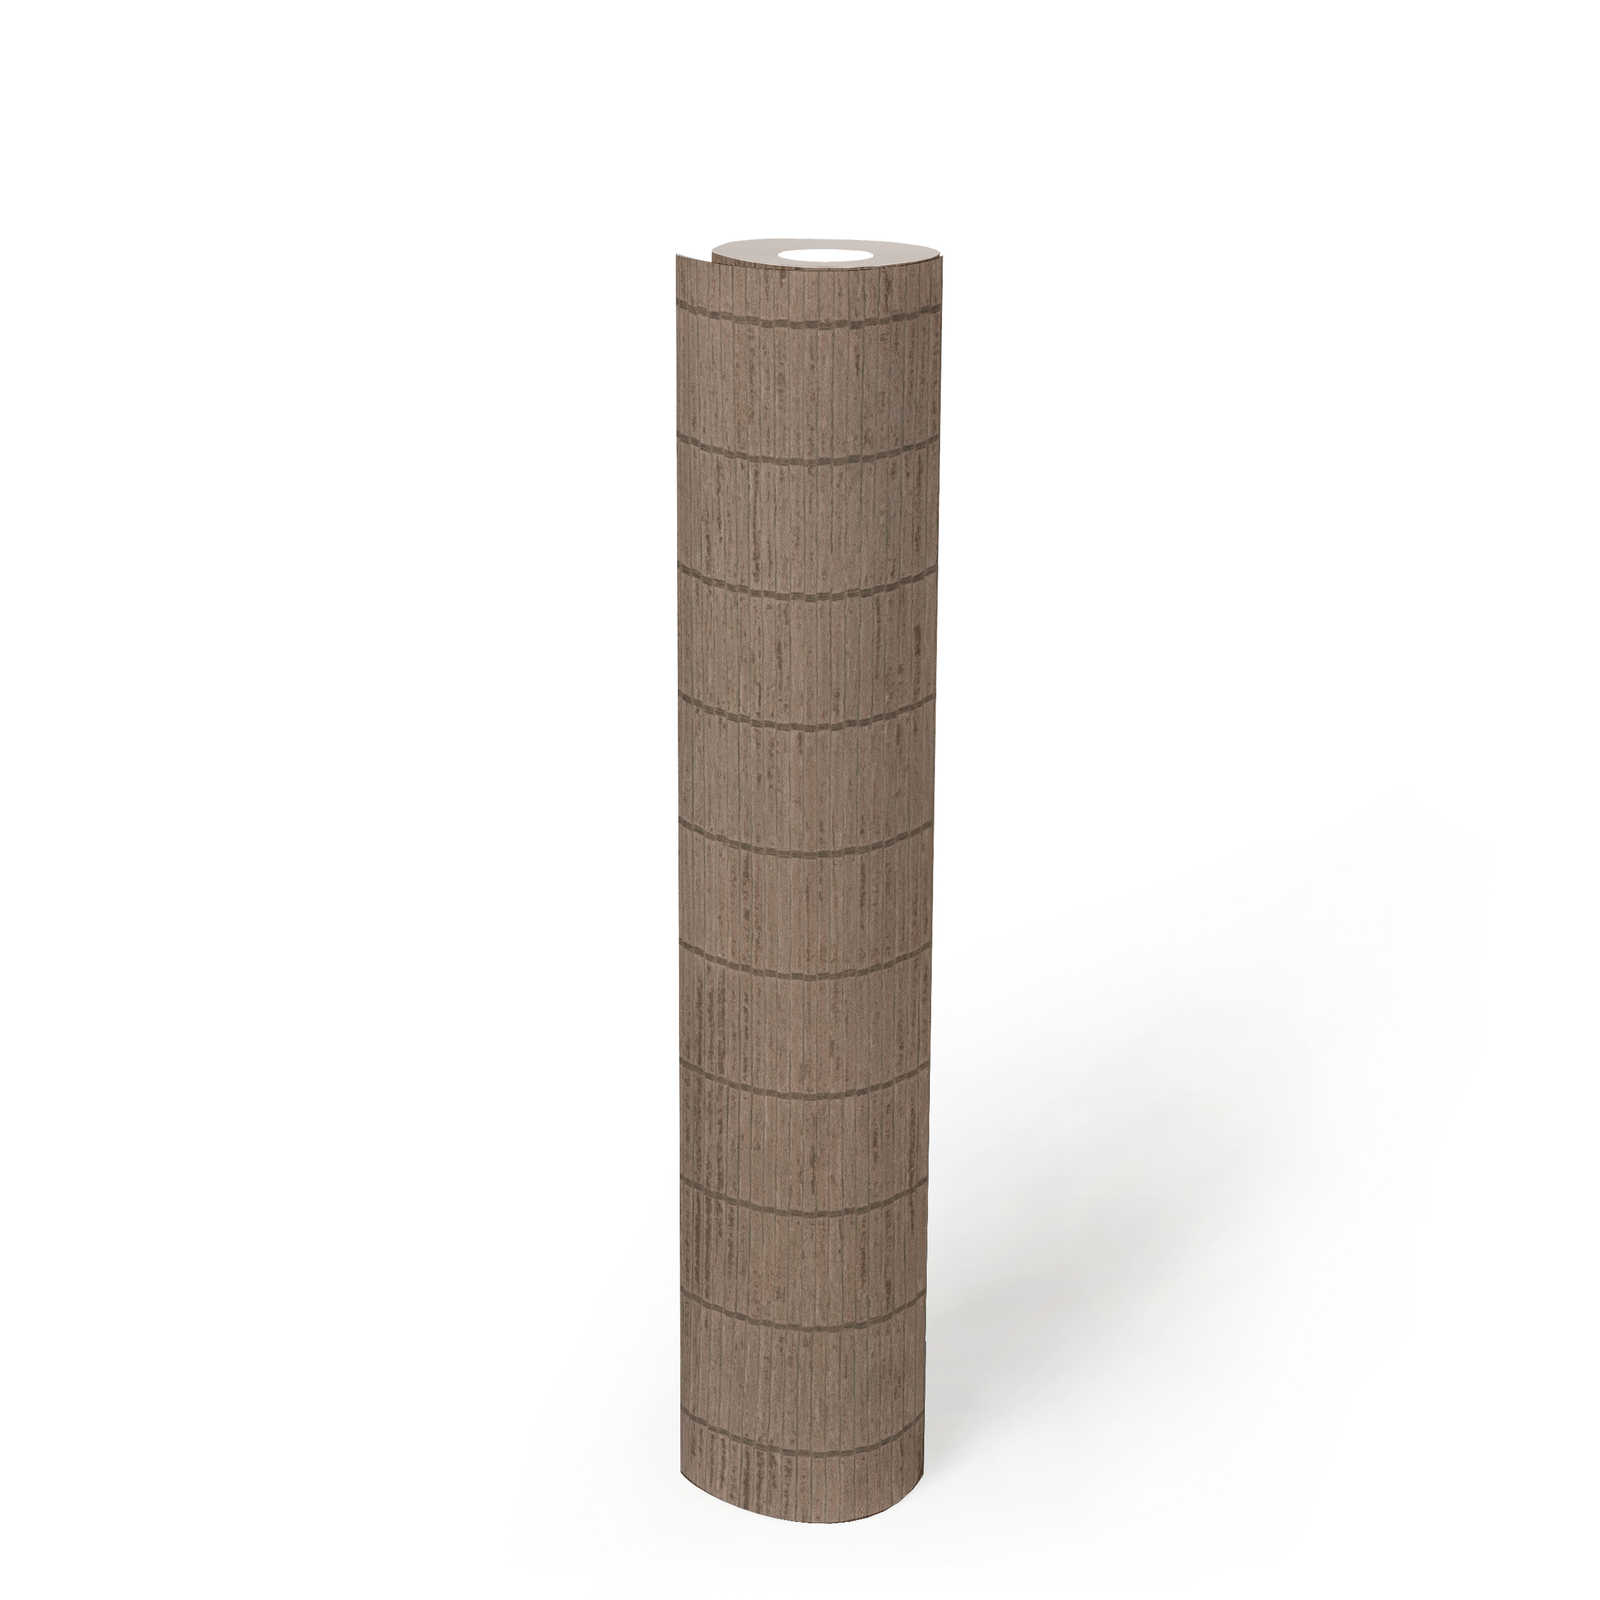             Non-woven wallpaper in Asian style with bamboo wall optic - brown
        